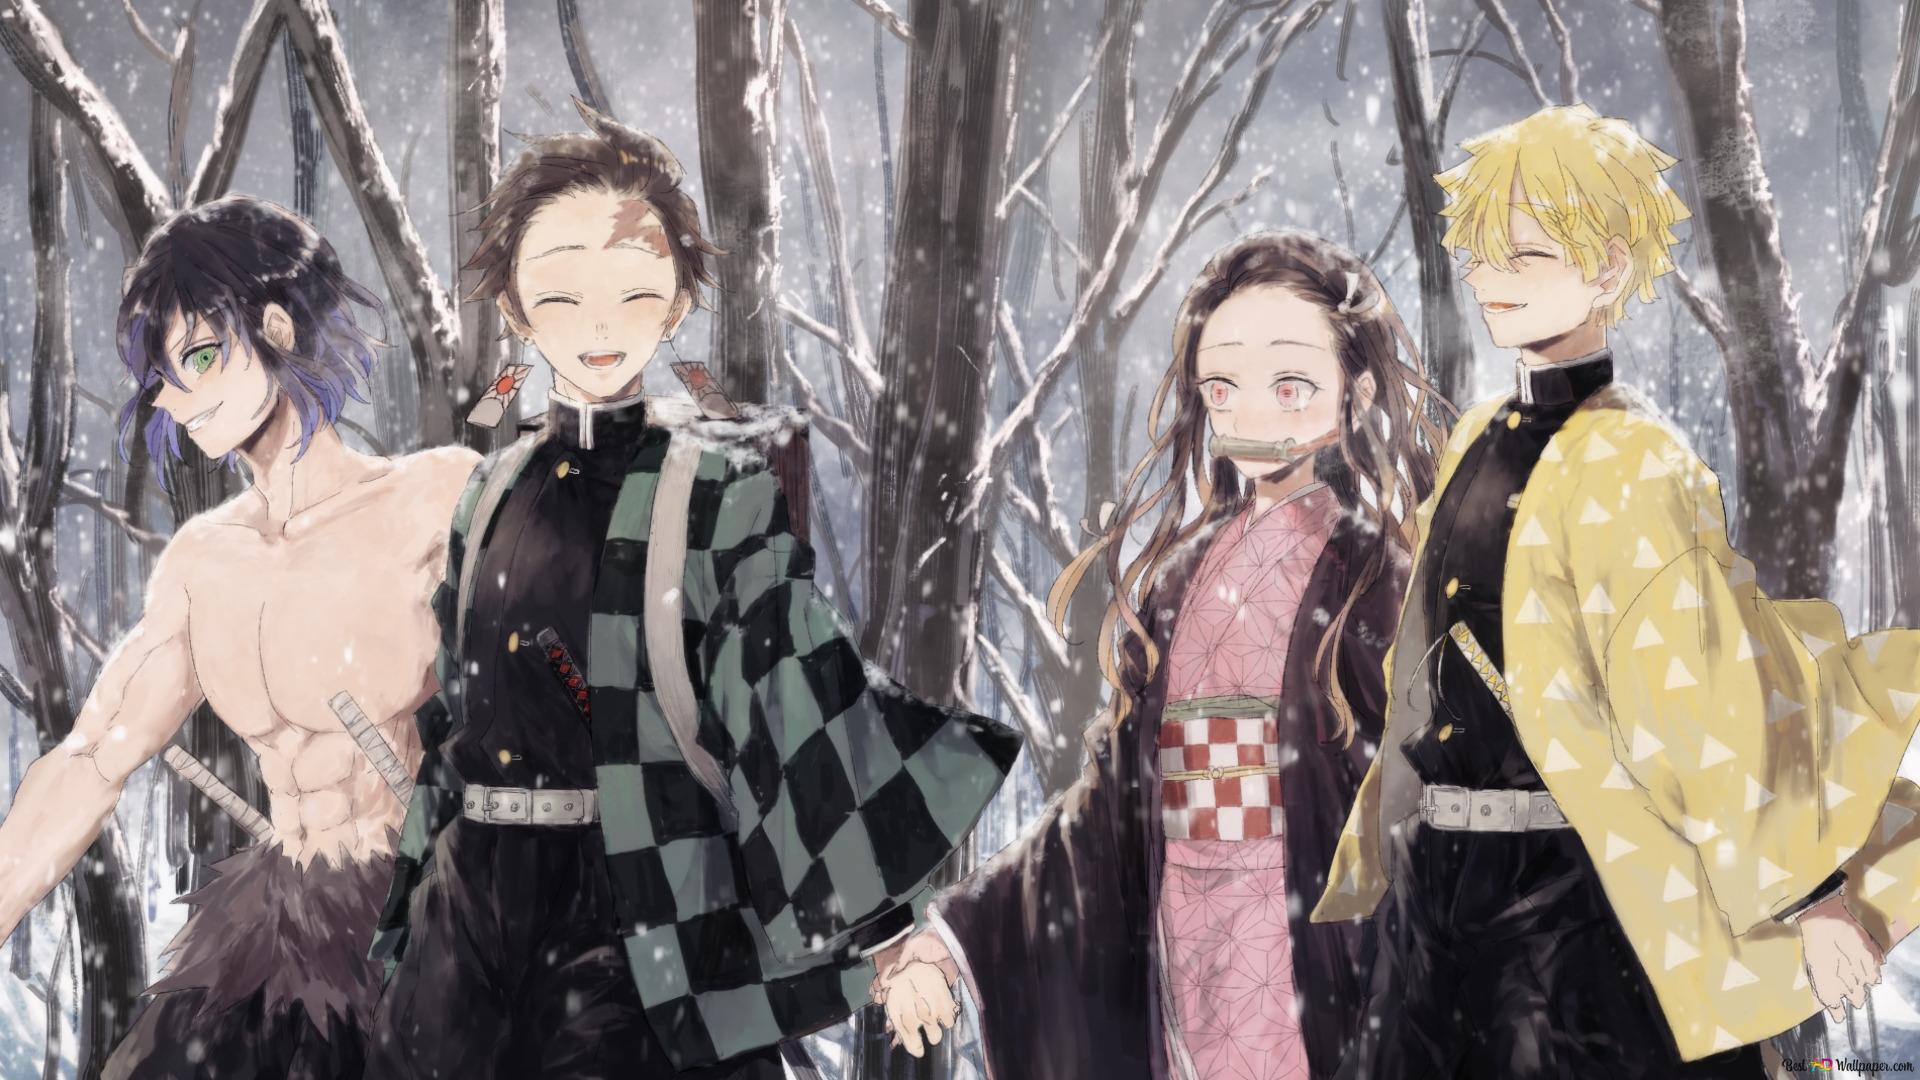 A group of anime characters in the snow - Demon Slayer